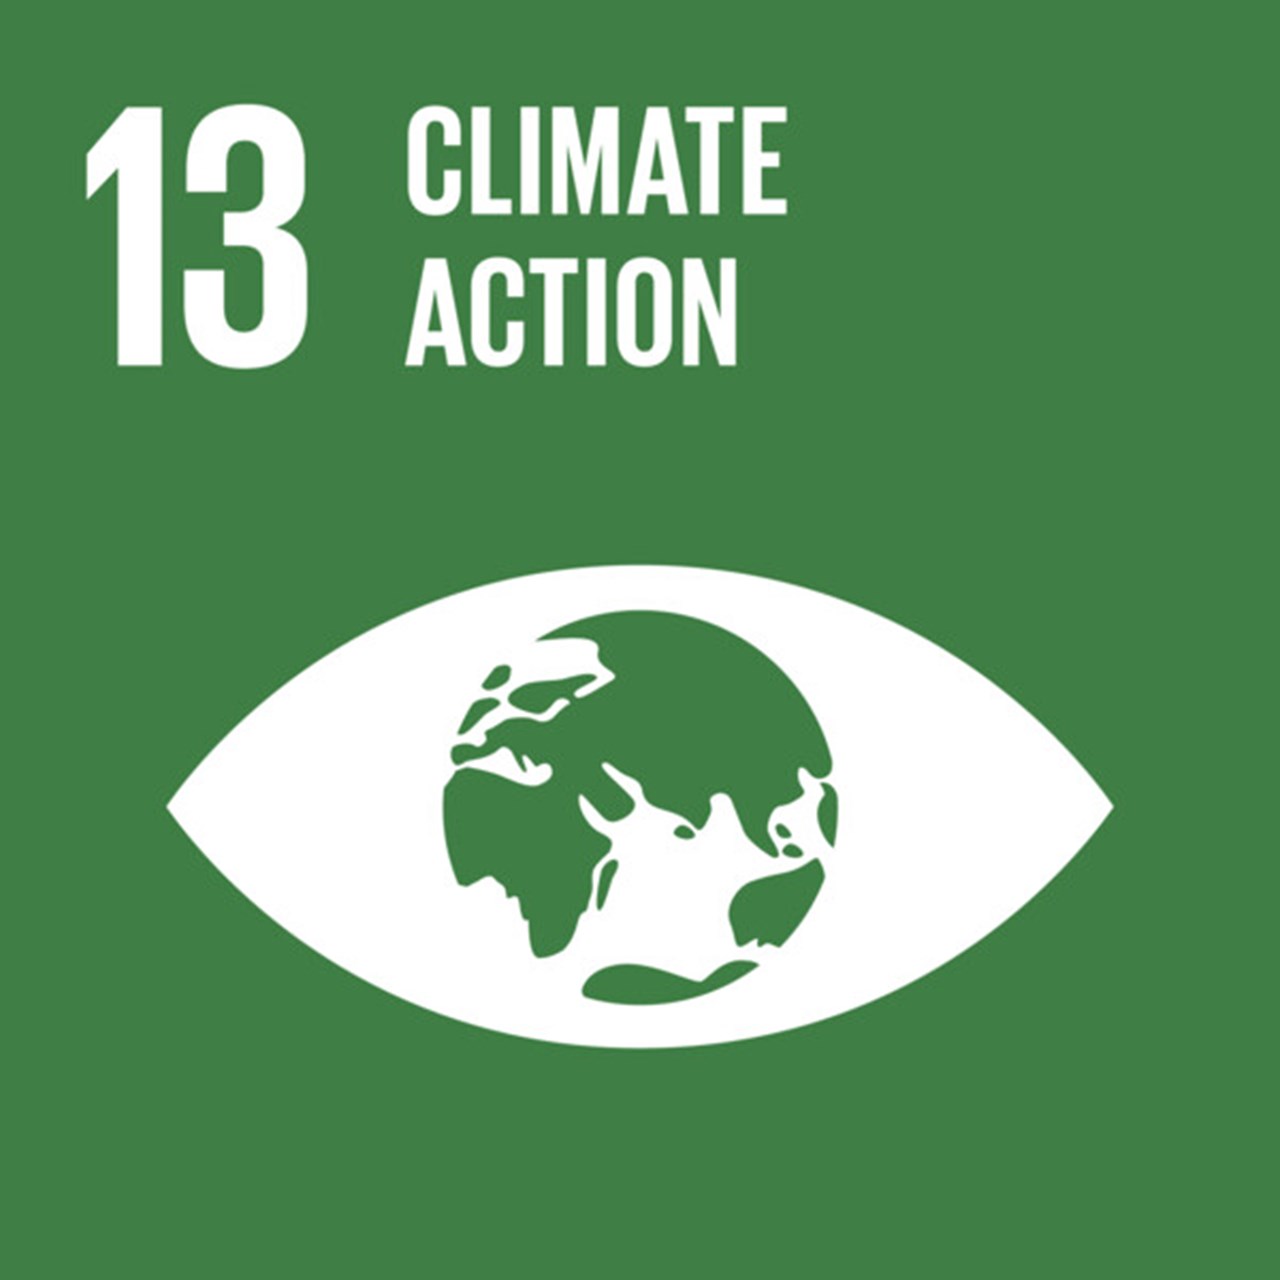 The Global Goals, Goal 13 - Climate Action